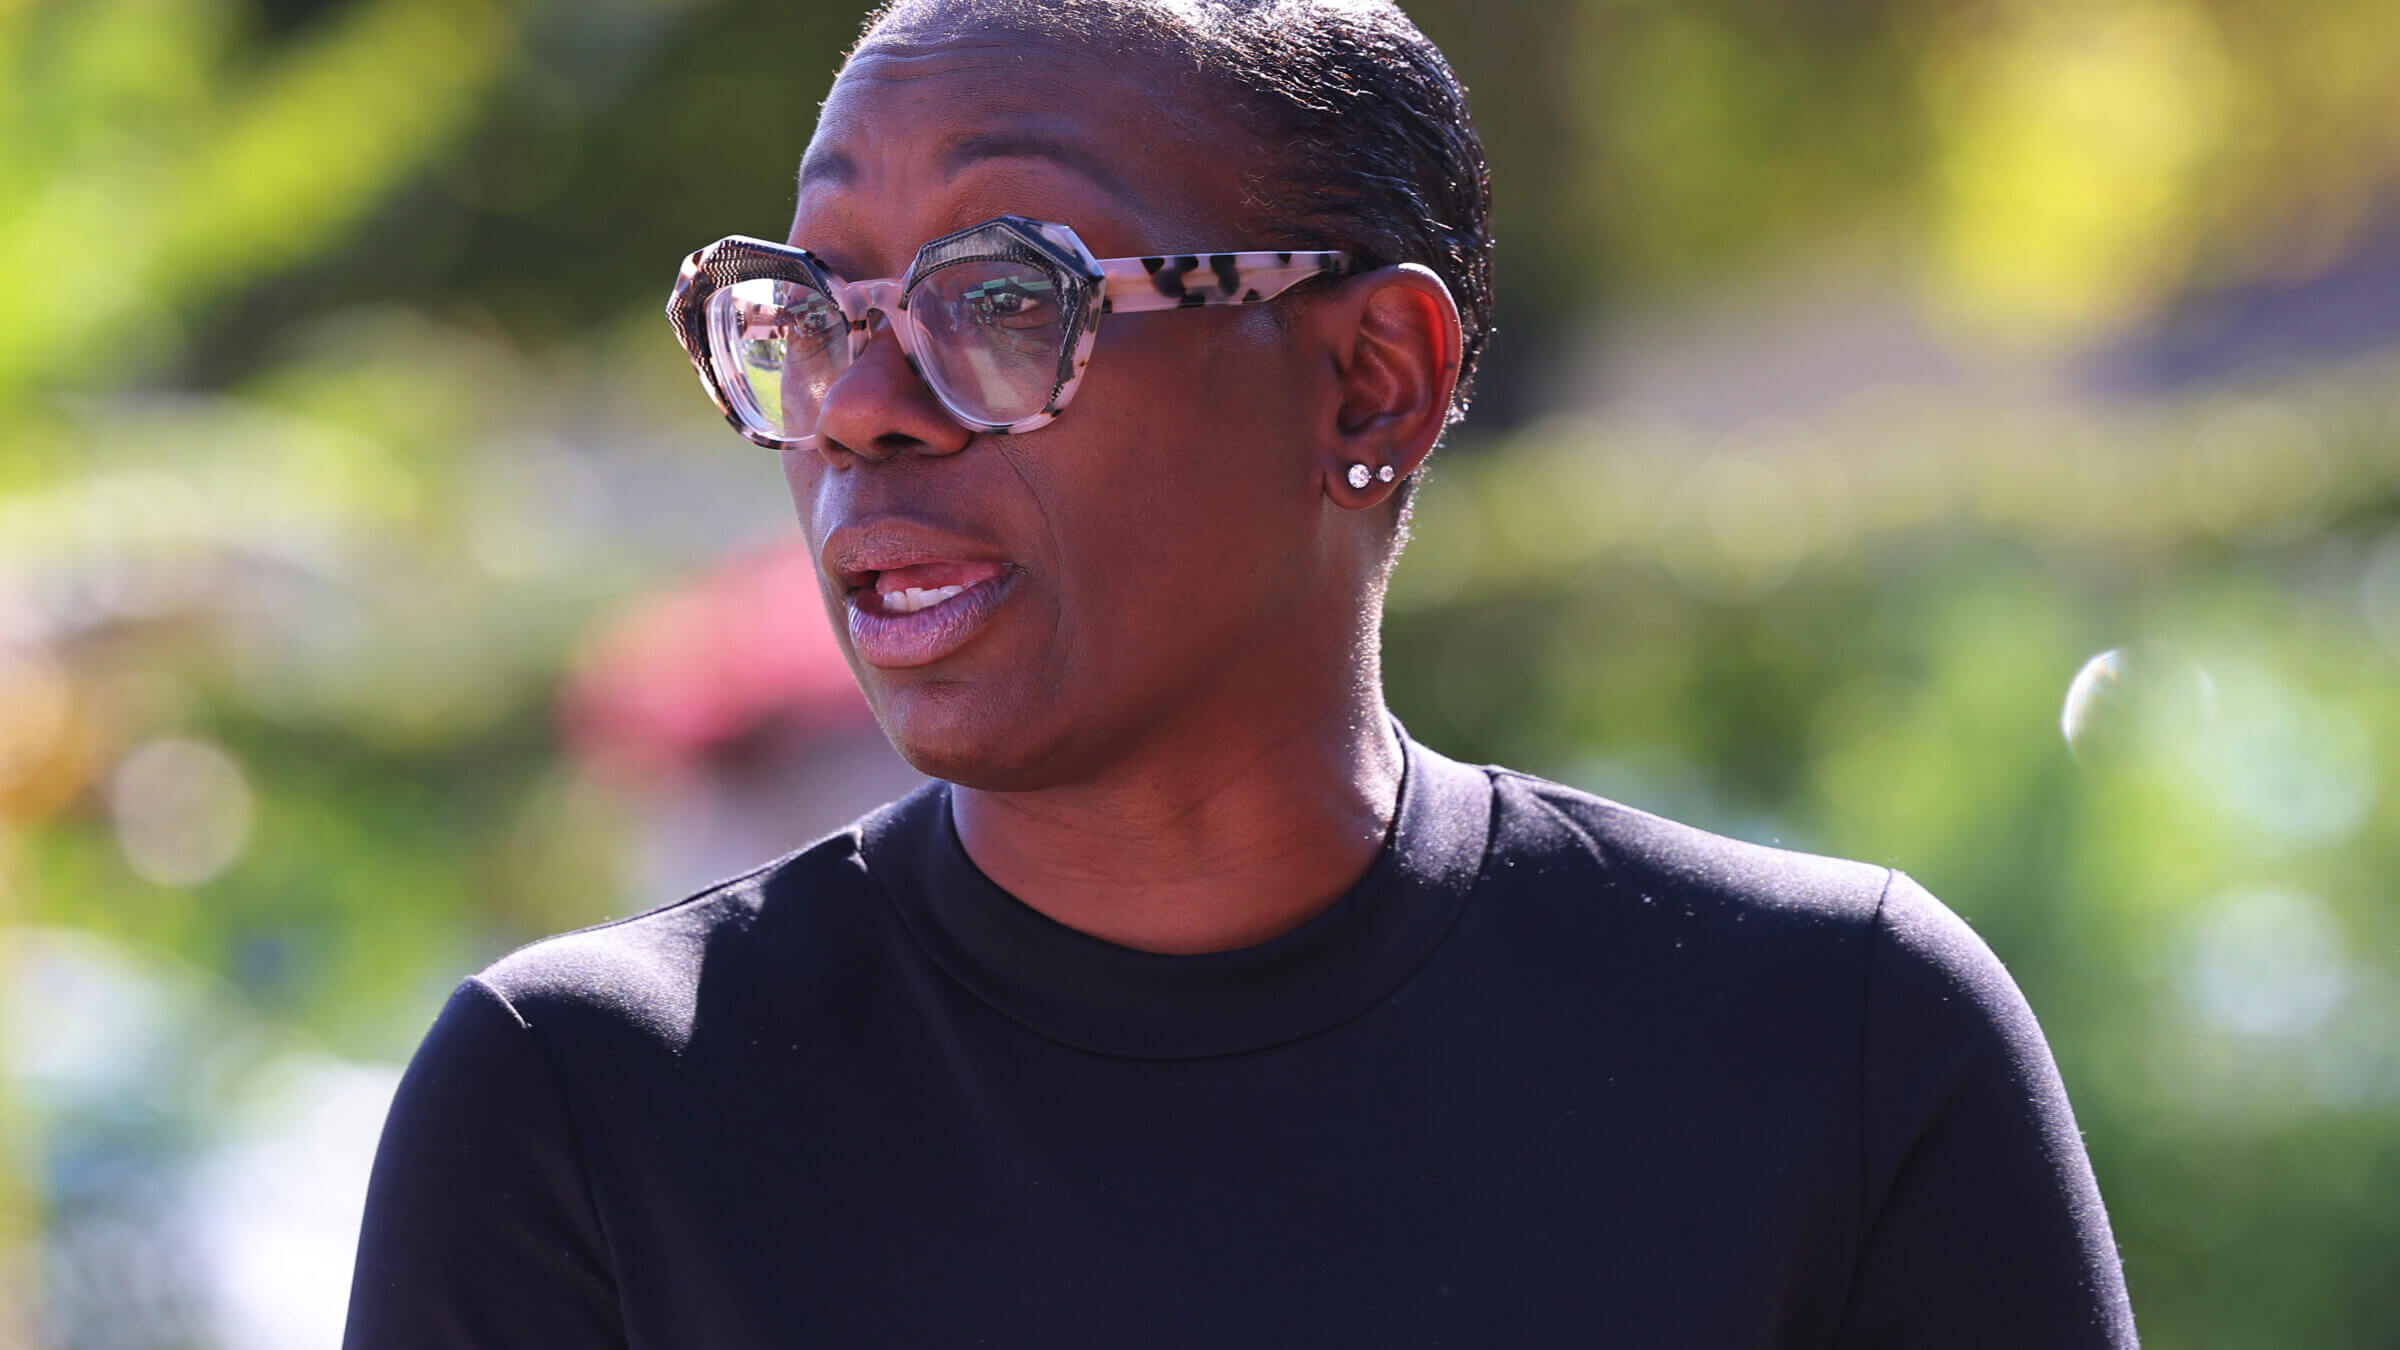  Congressional candidate Nina Turner speaks during a 'Get Out the Vote' canvassing event on August 02, 2021 in Cleveland, Ohio.